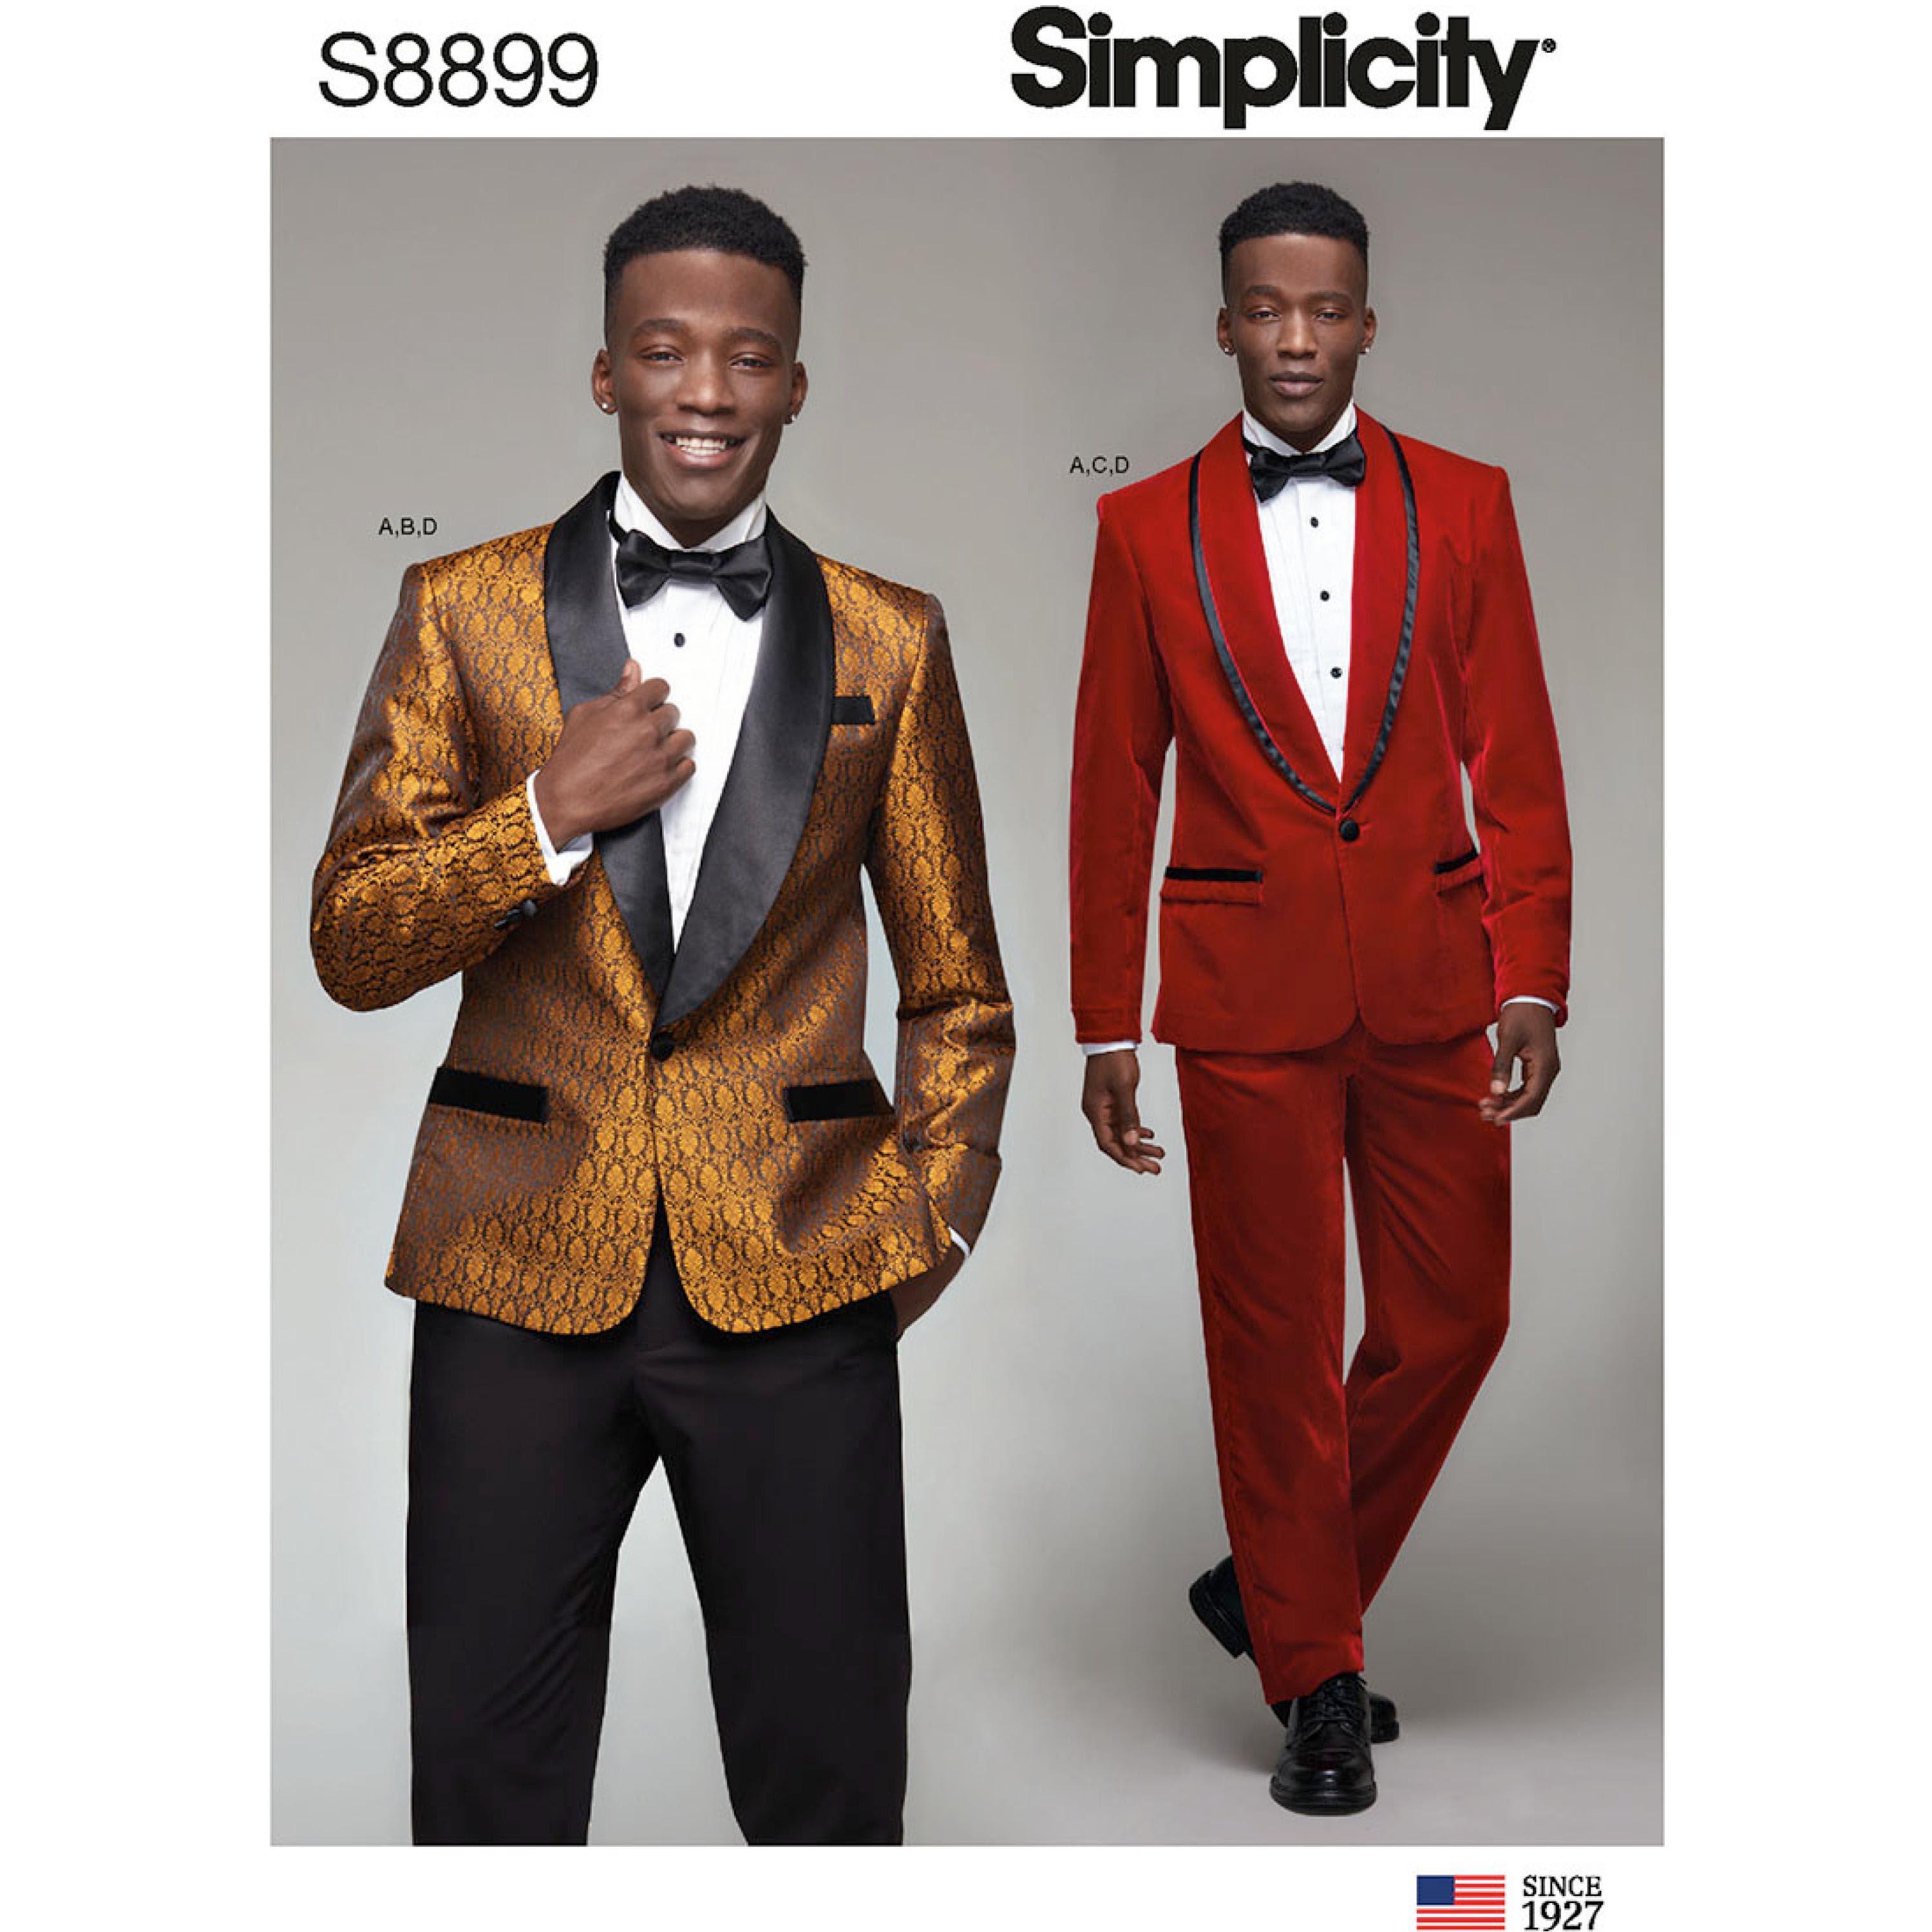 Simplicity S8899 Men's Tuxedo Jackets, Pants and Bow Tie